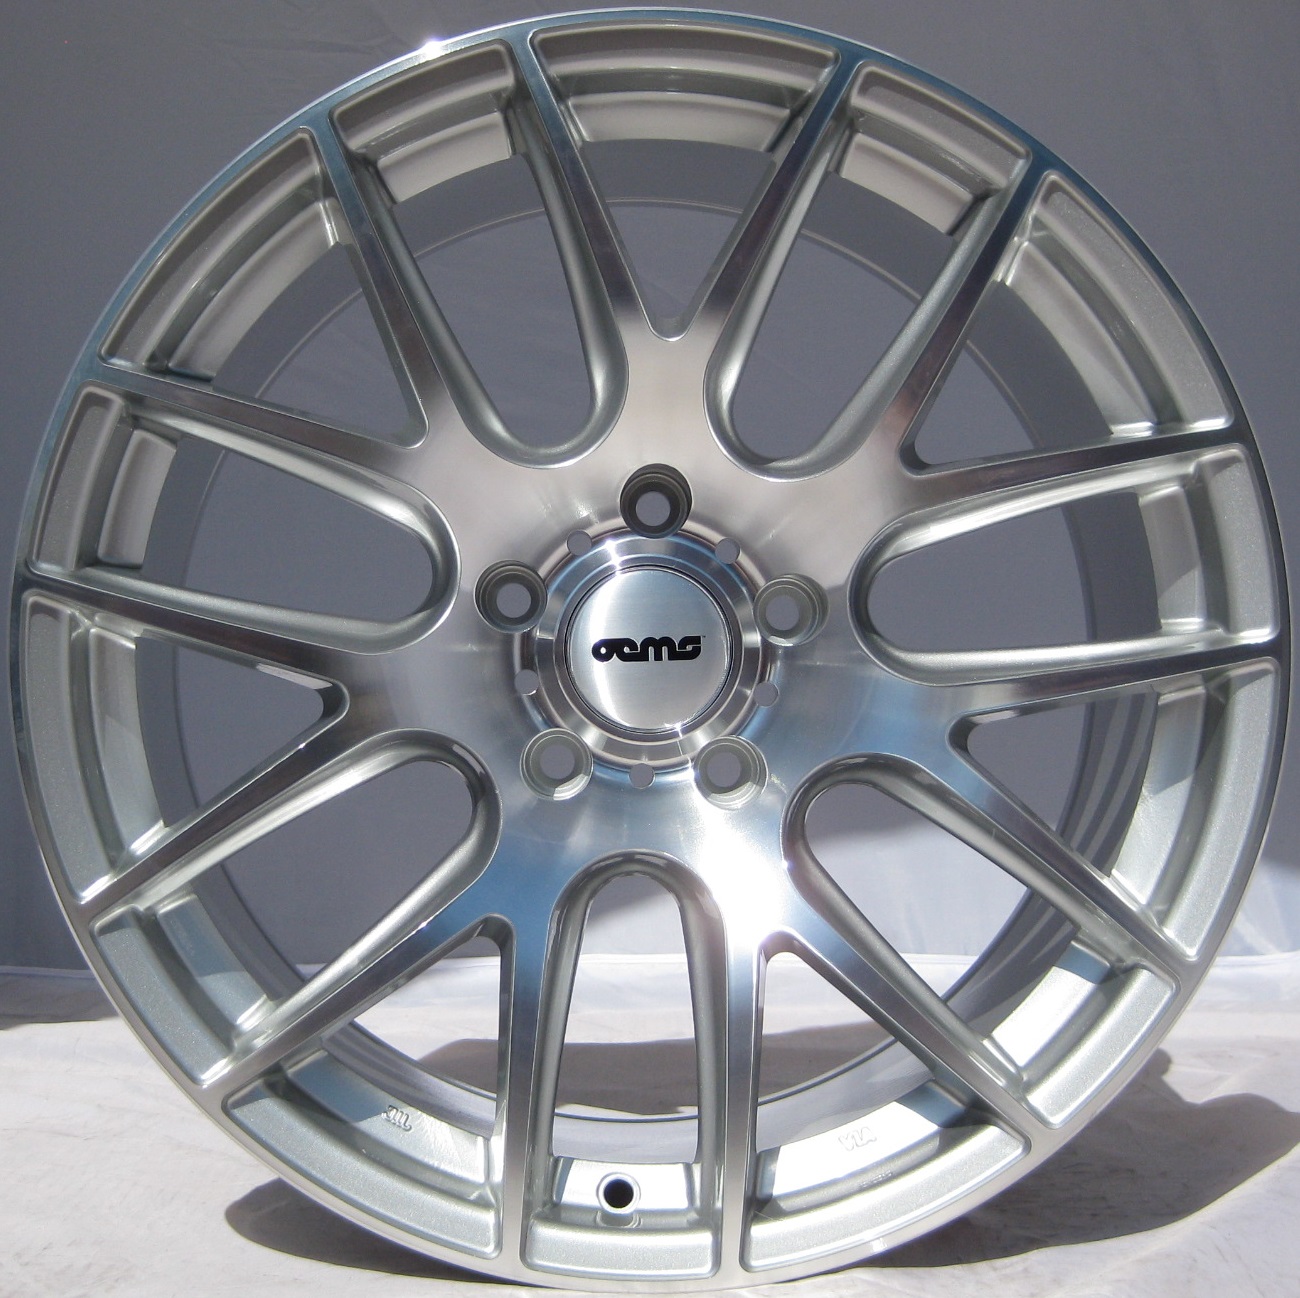 NEW 20" OEMS 111 ALLOY WHEELS IN SILVER WITH POLISHED FACE AND BIG CONCAVE 10" ALL ROUND